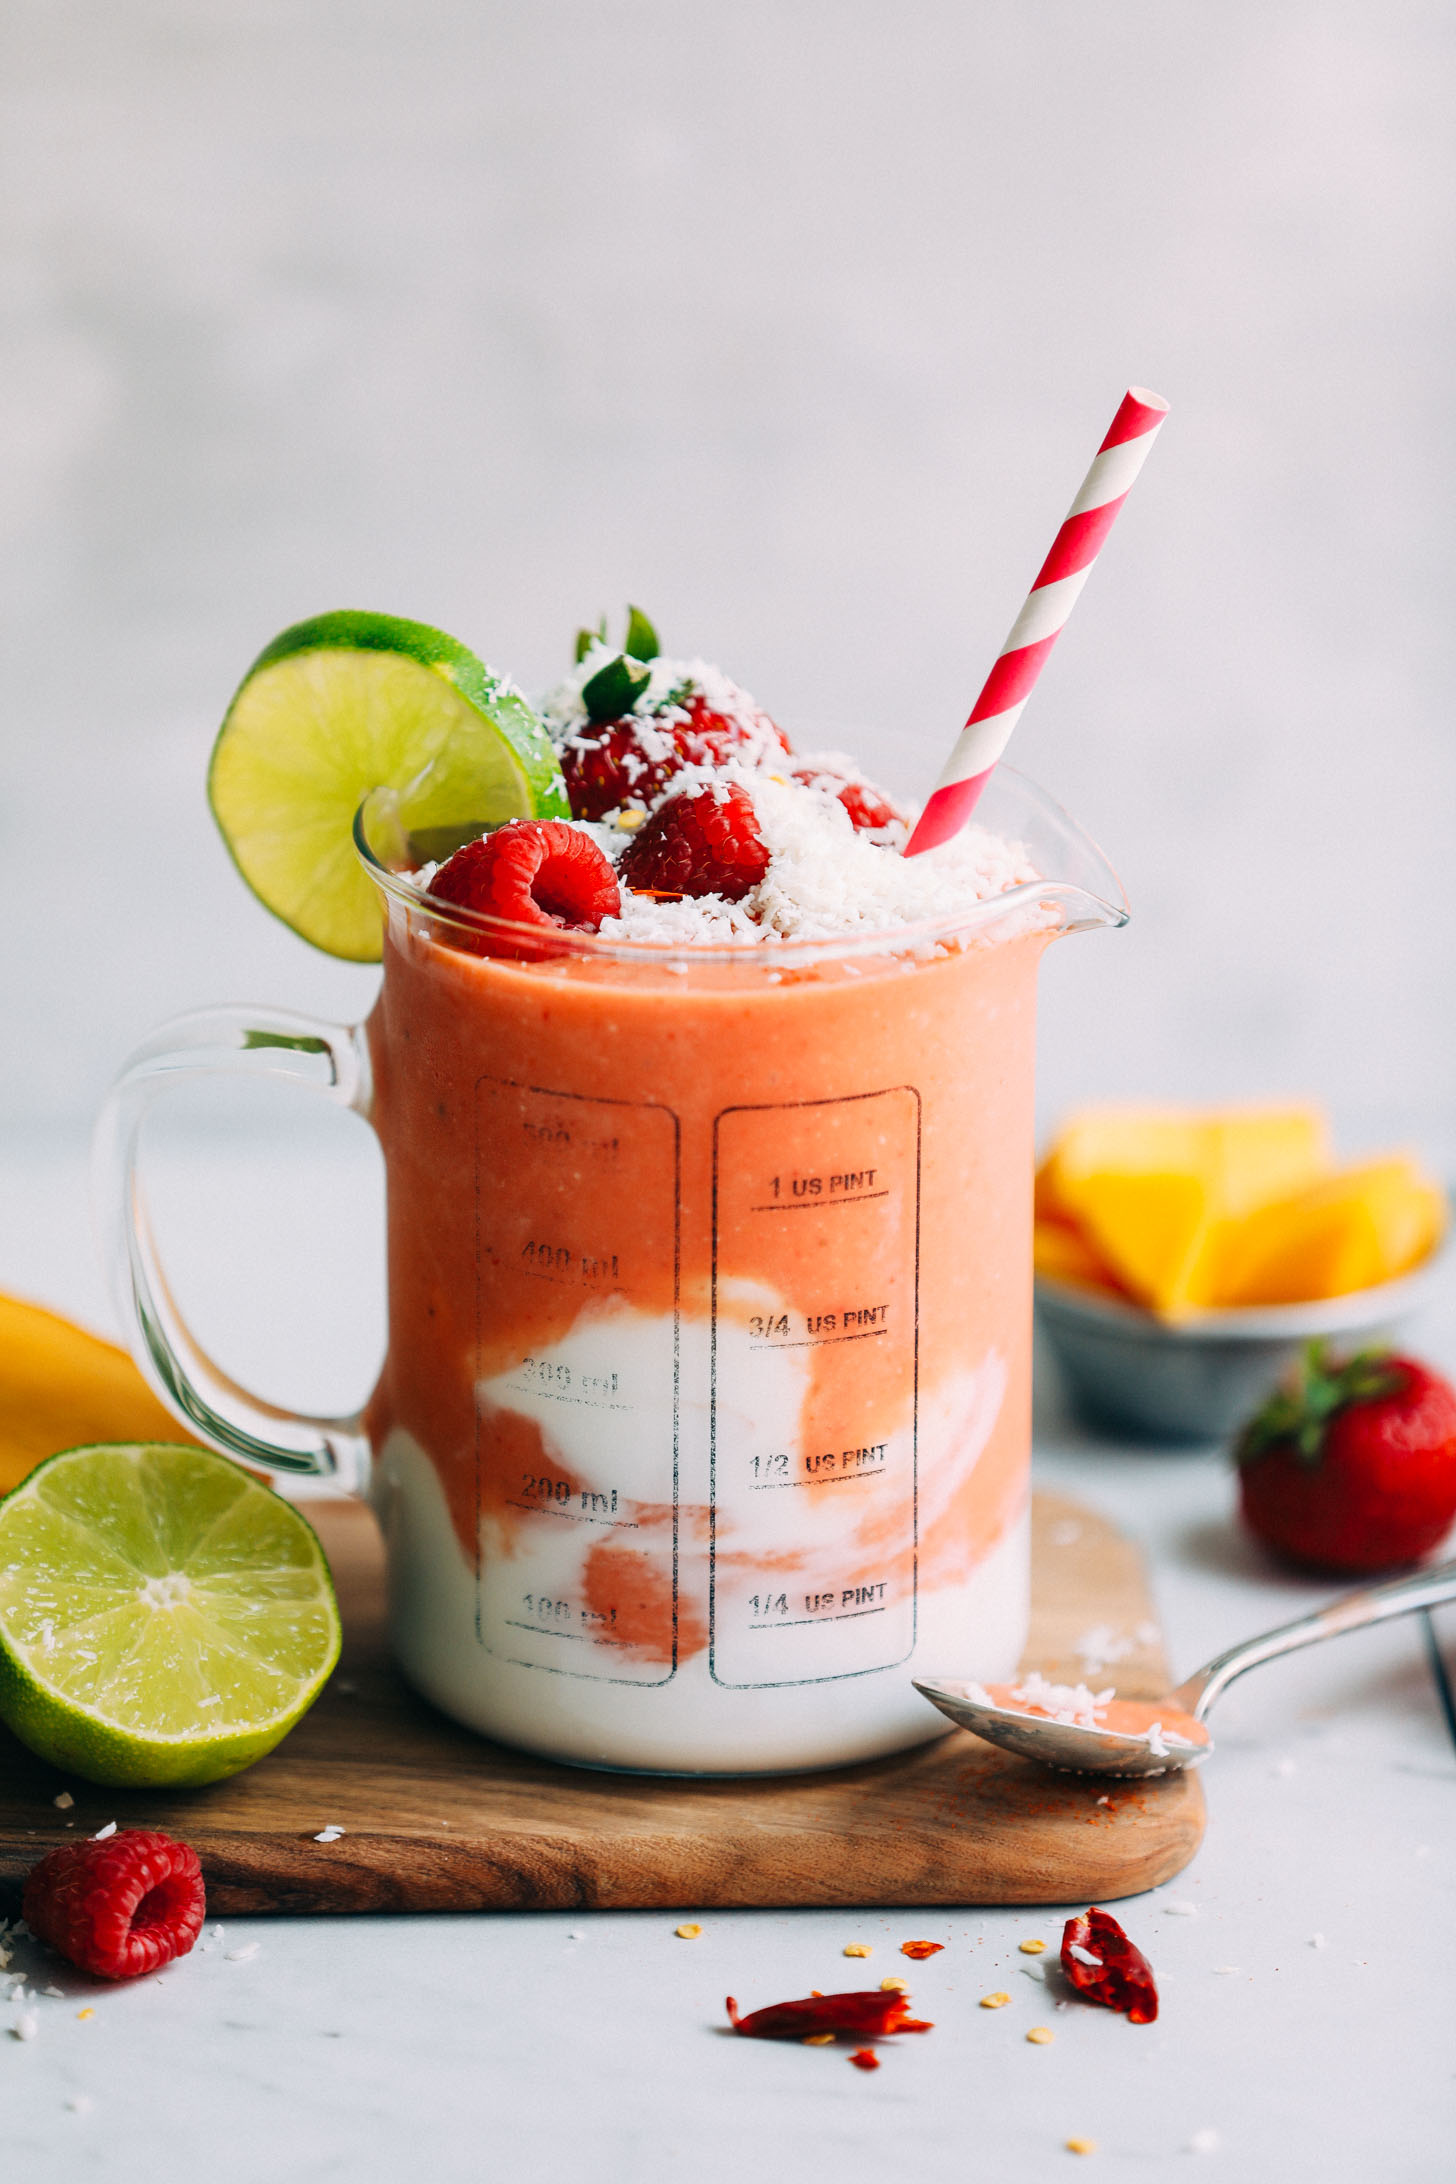 Serving jar with Gingery Mango & Berry Smoothie topped with fresh fruit and shredded coconut